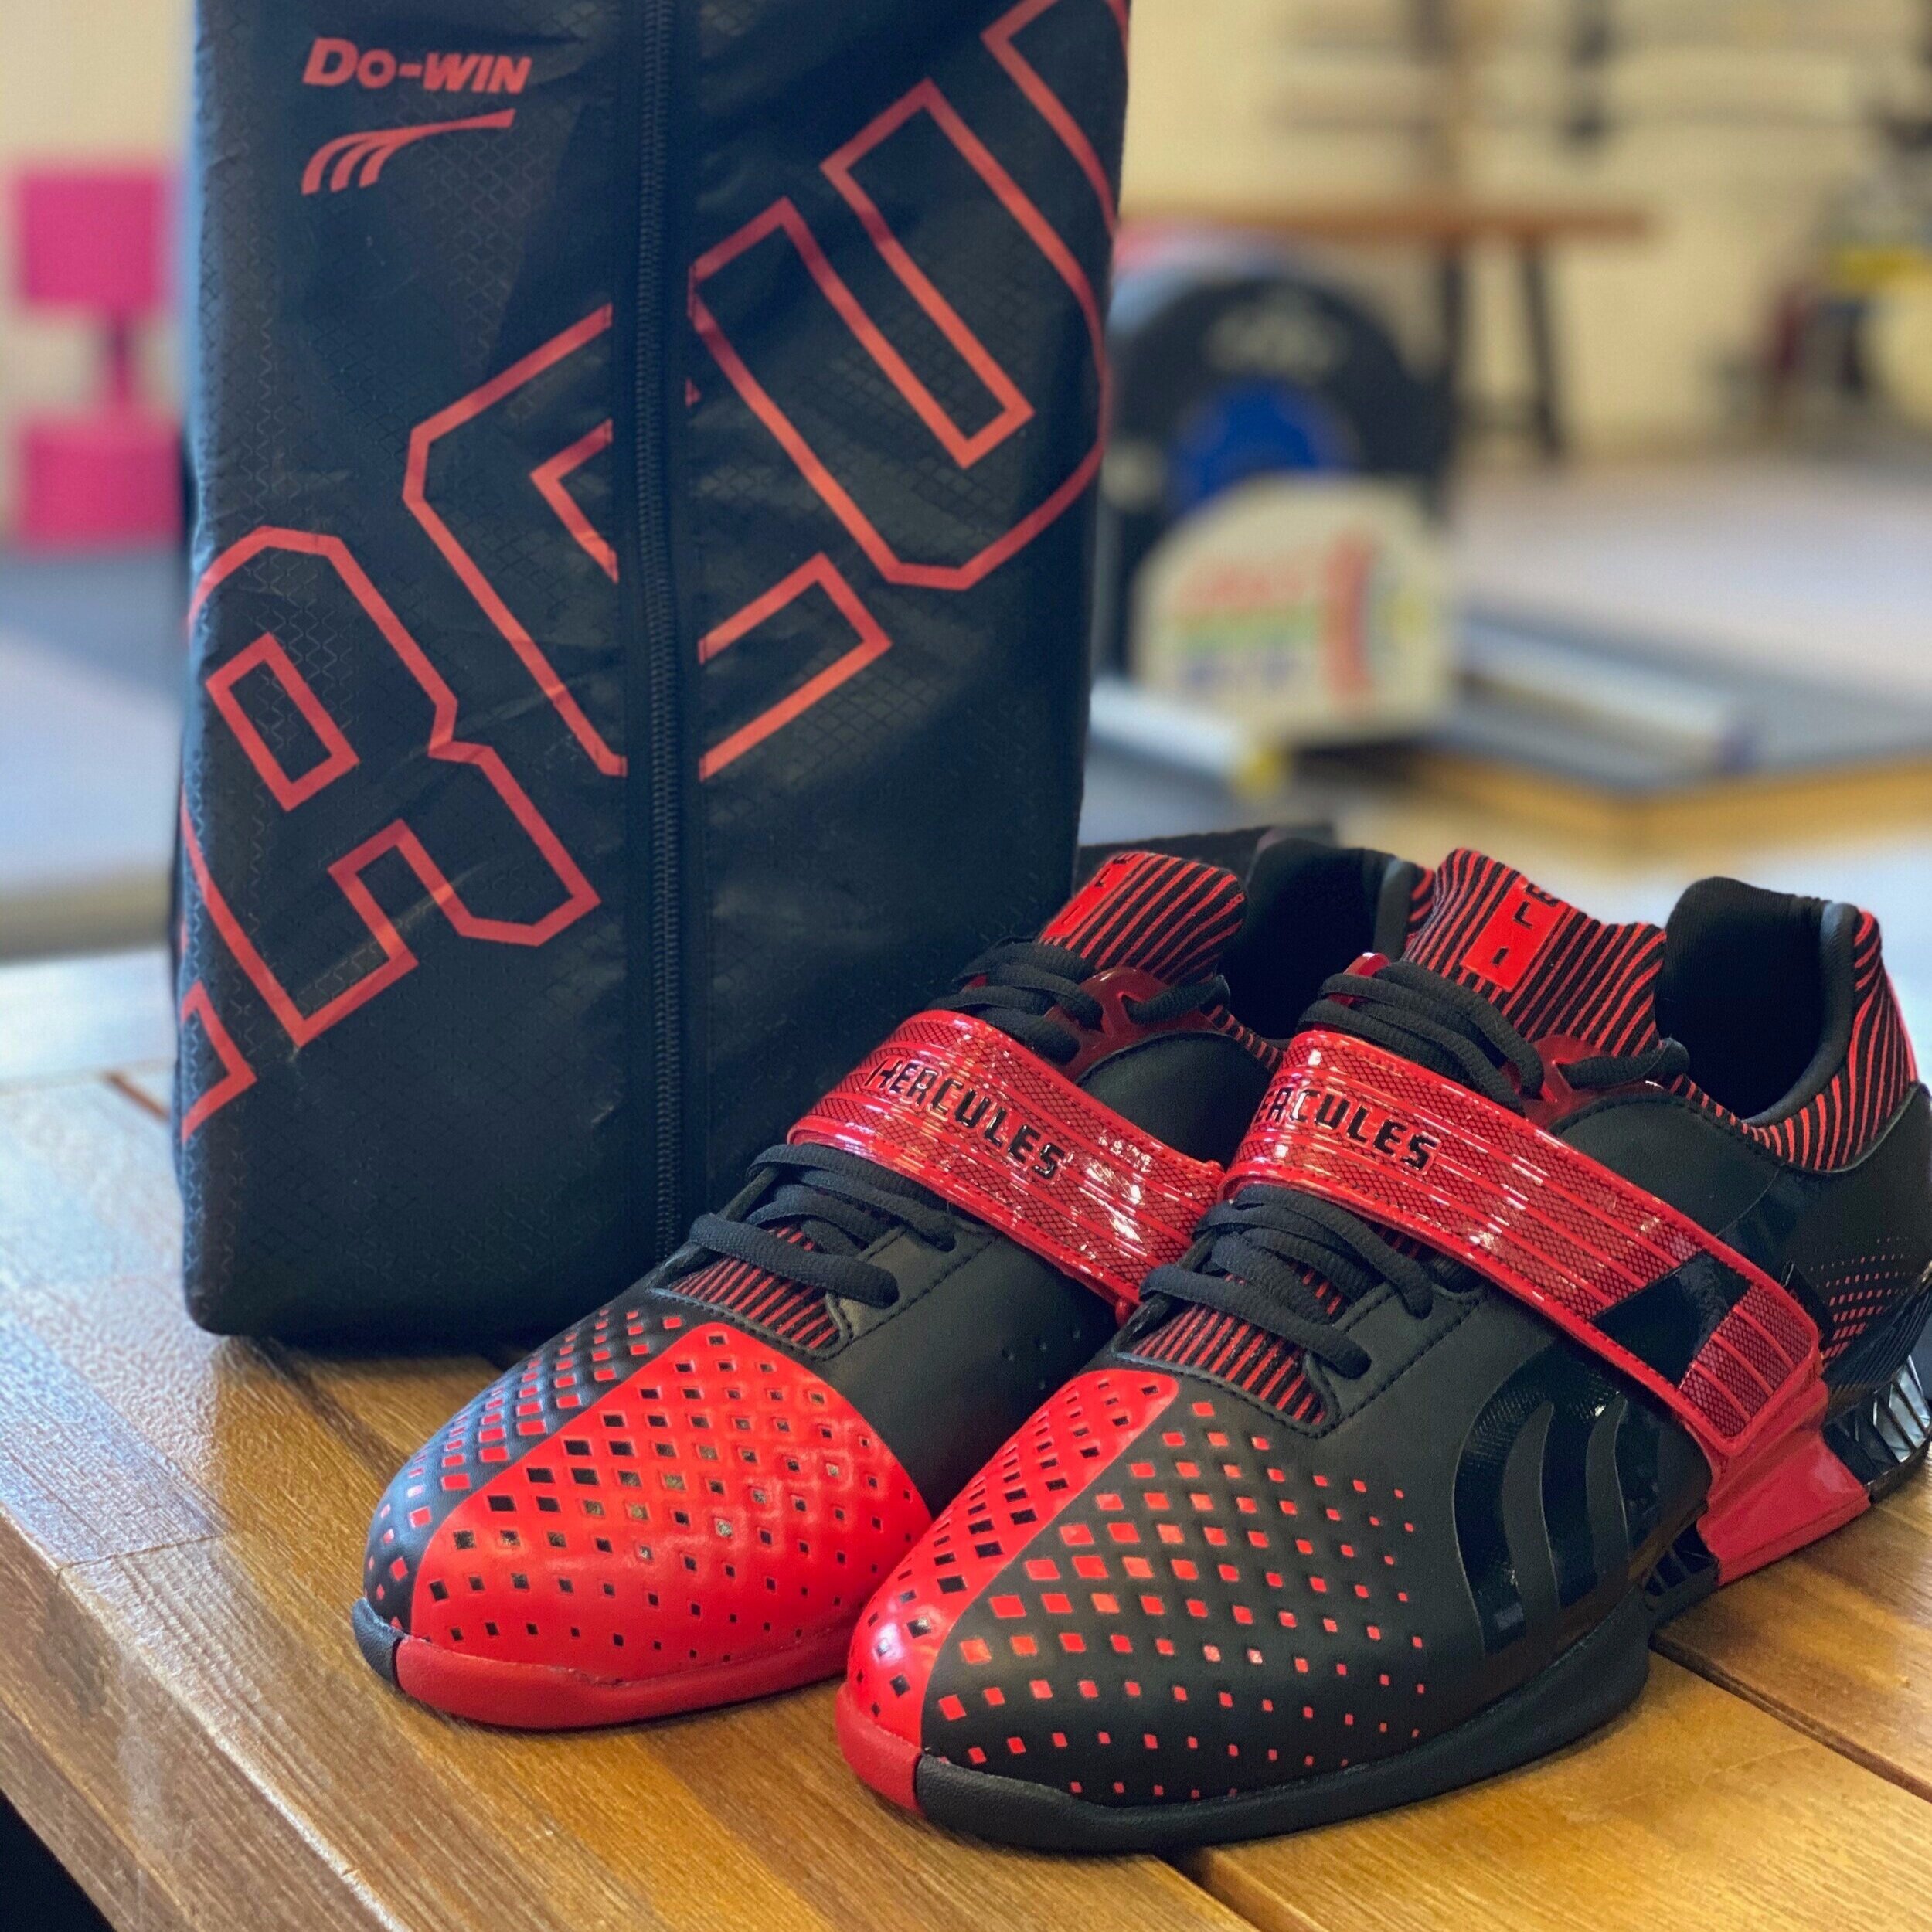 oly weightlifting shoes